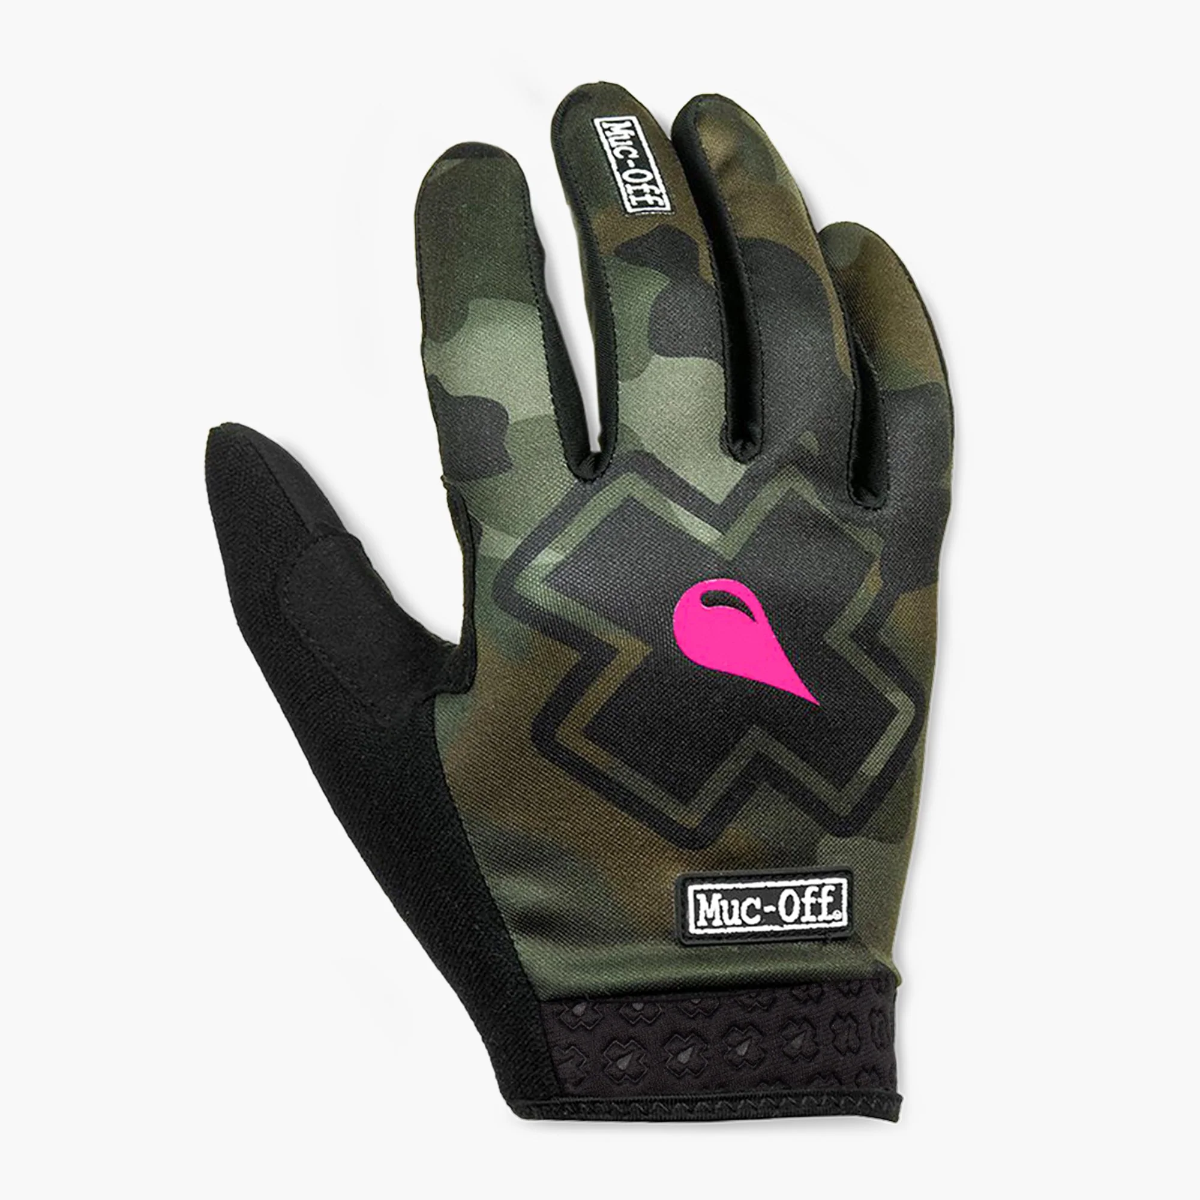 Gloves Muc-Off Riders Gloves - Camo